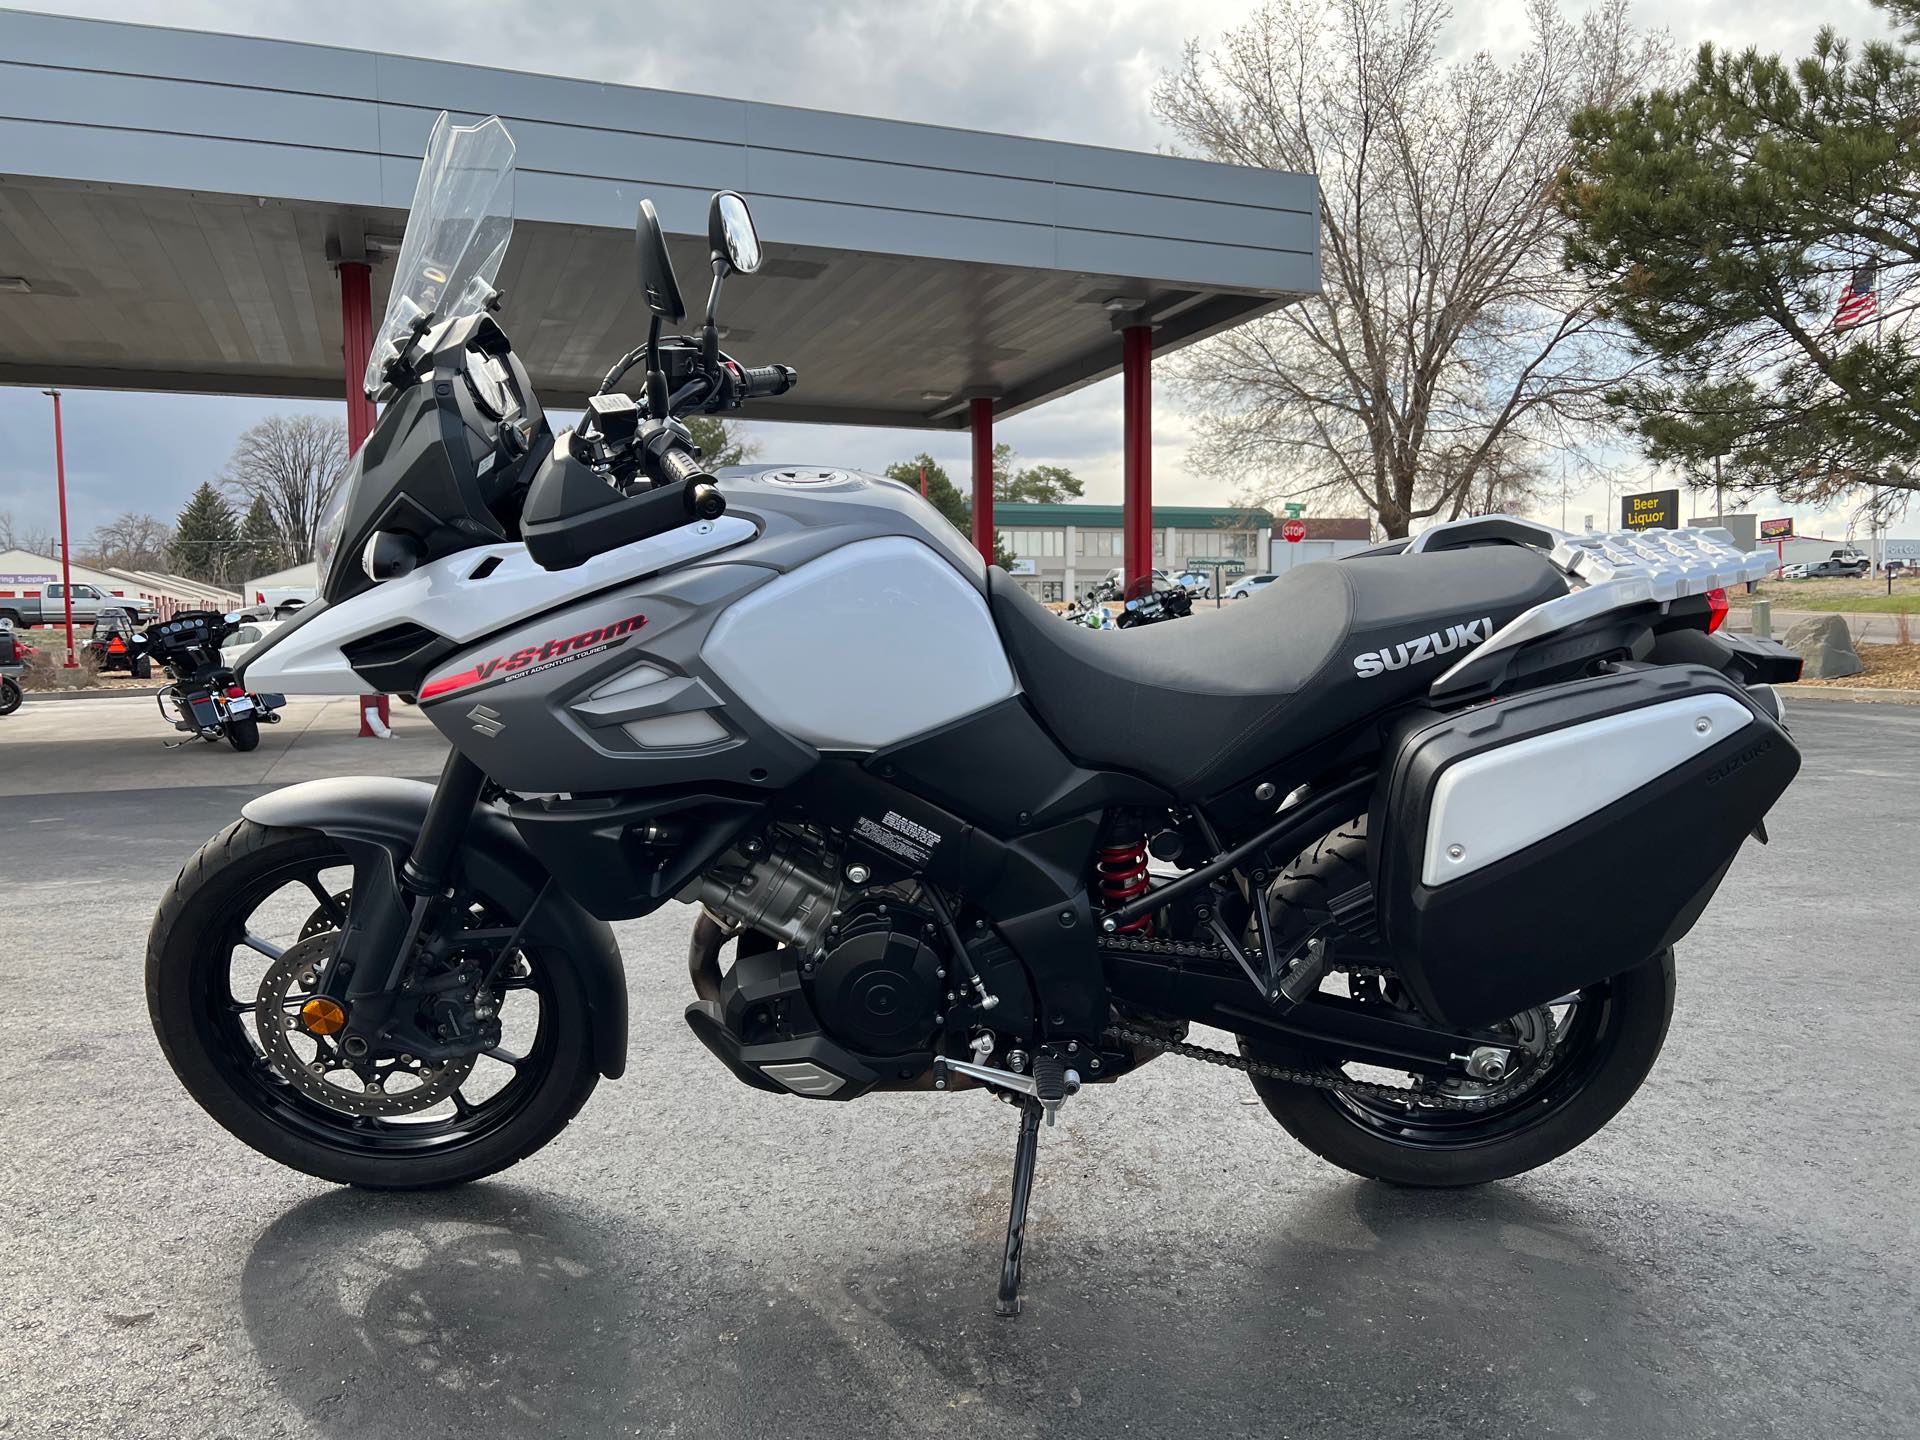 2018 Suzuki V-Strom 1000 at Aces Motorcycles - Fort Collins